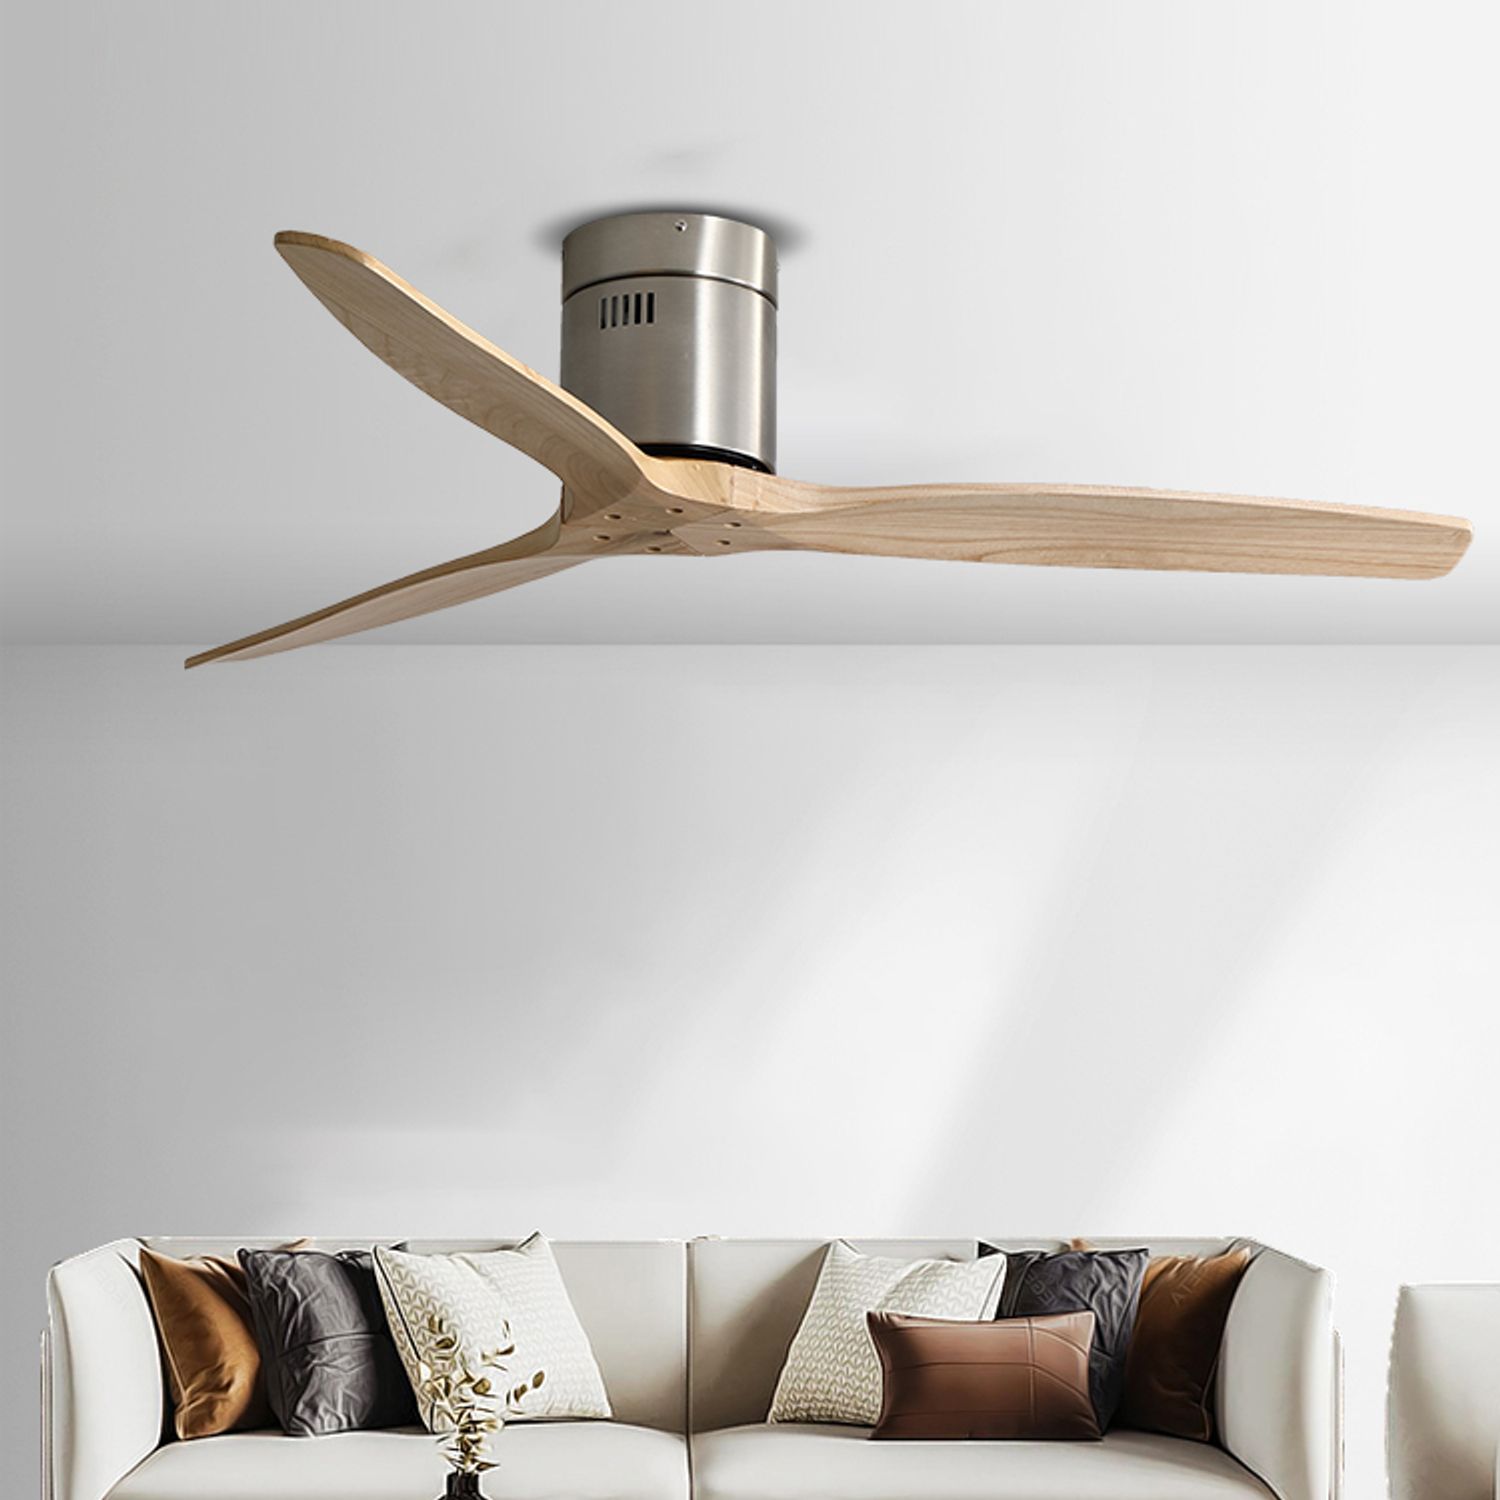 Decorative 52 Inch Brushed Nickel & Wood Ceiling Fan with Forward and Reverse Control at a living room